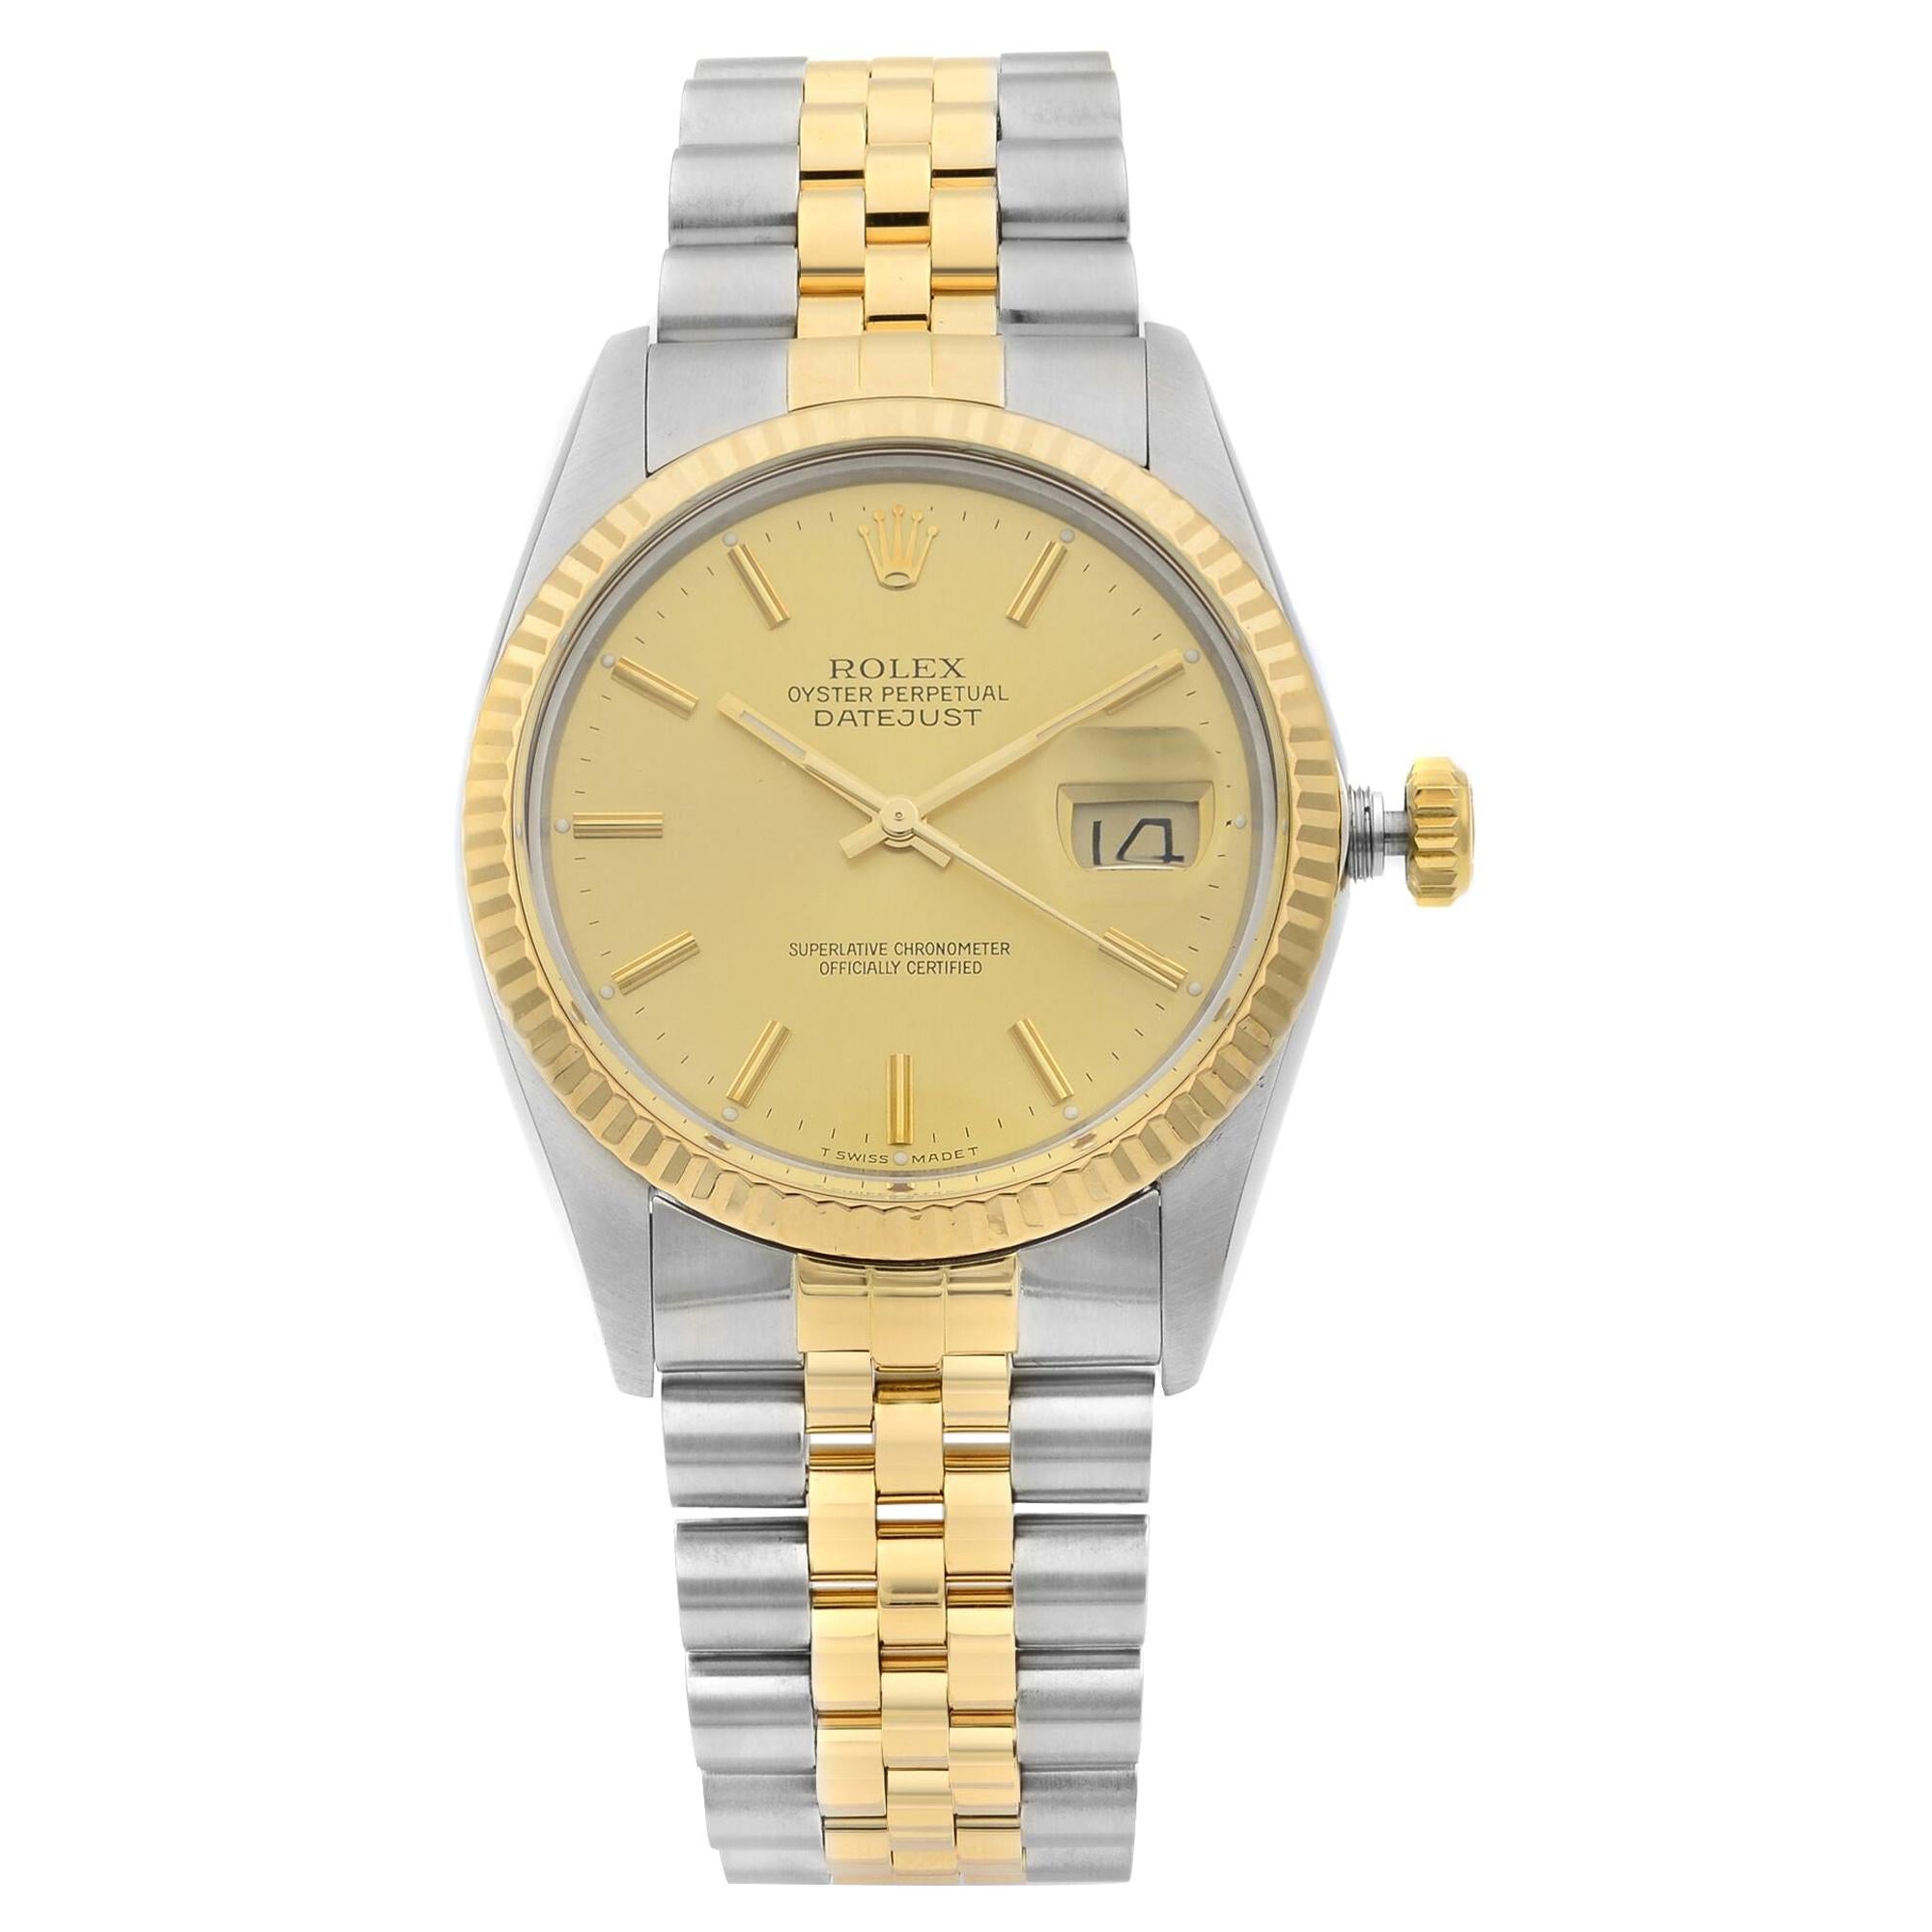 Rolex Datejust 18K Gold Steel Champagne Dial Automatic Mens Watch 16013